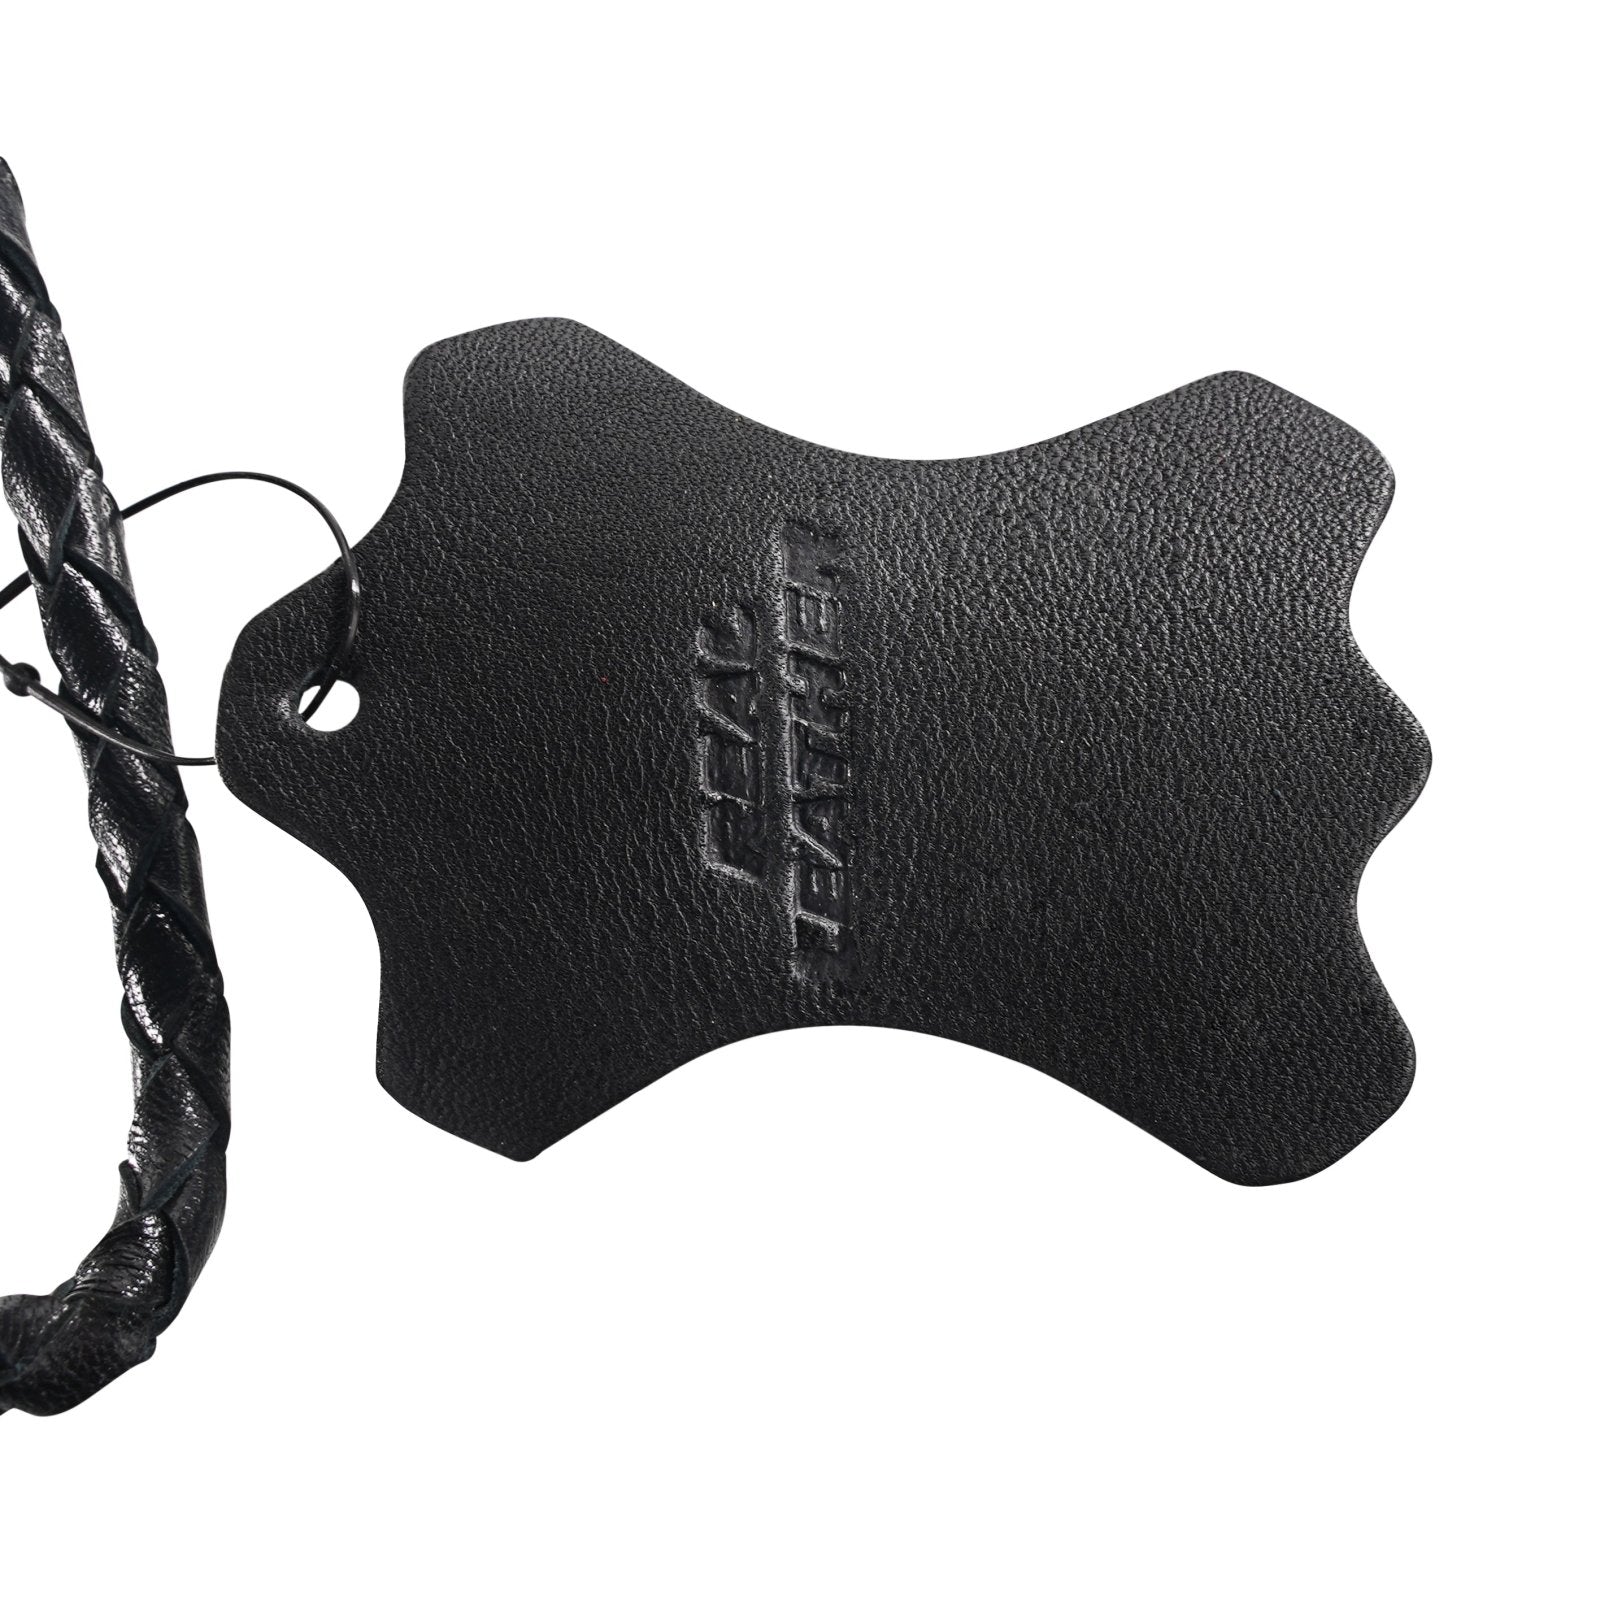 Core By Kink Premium Soft Leather Flogger - Kink Store